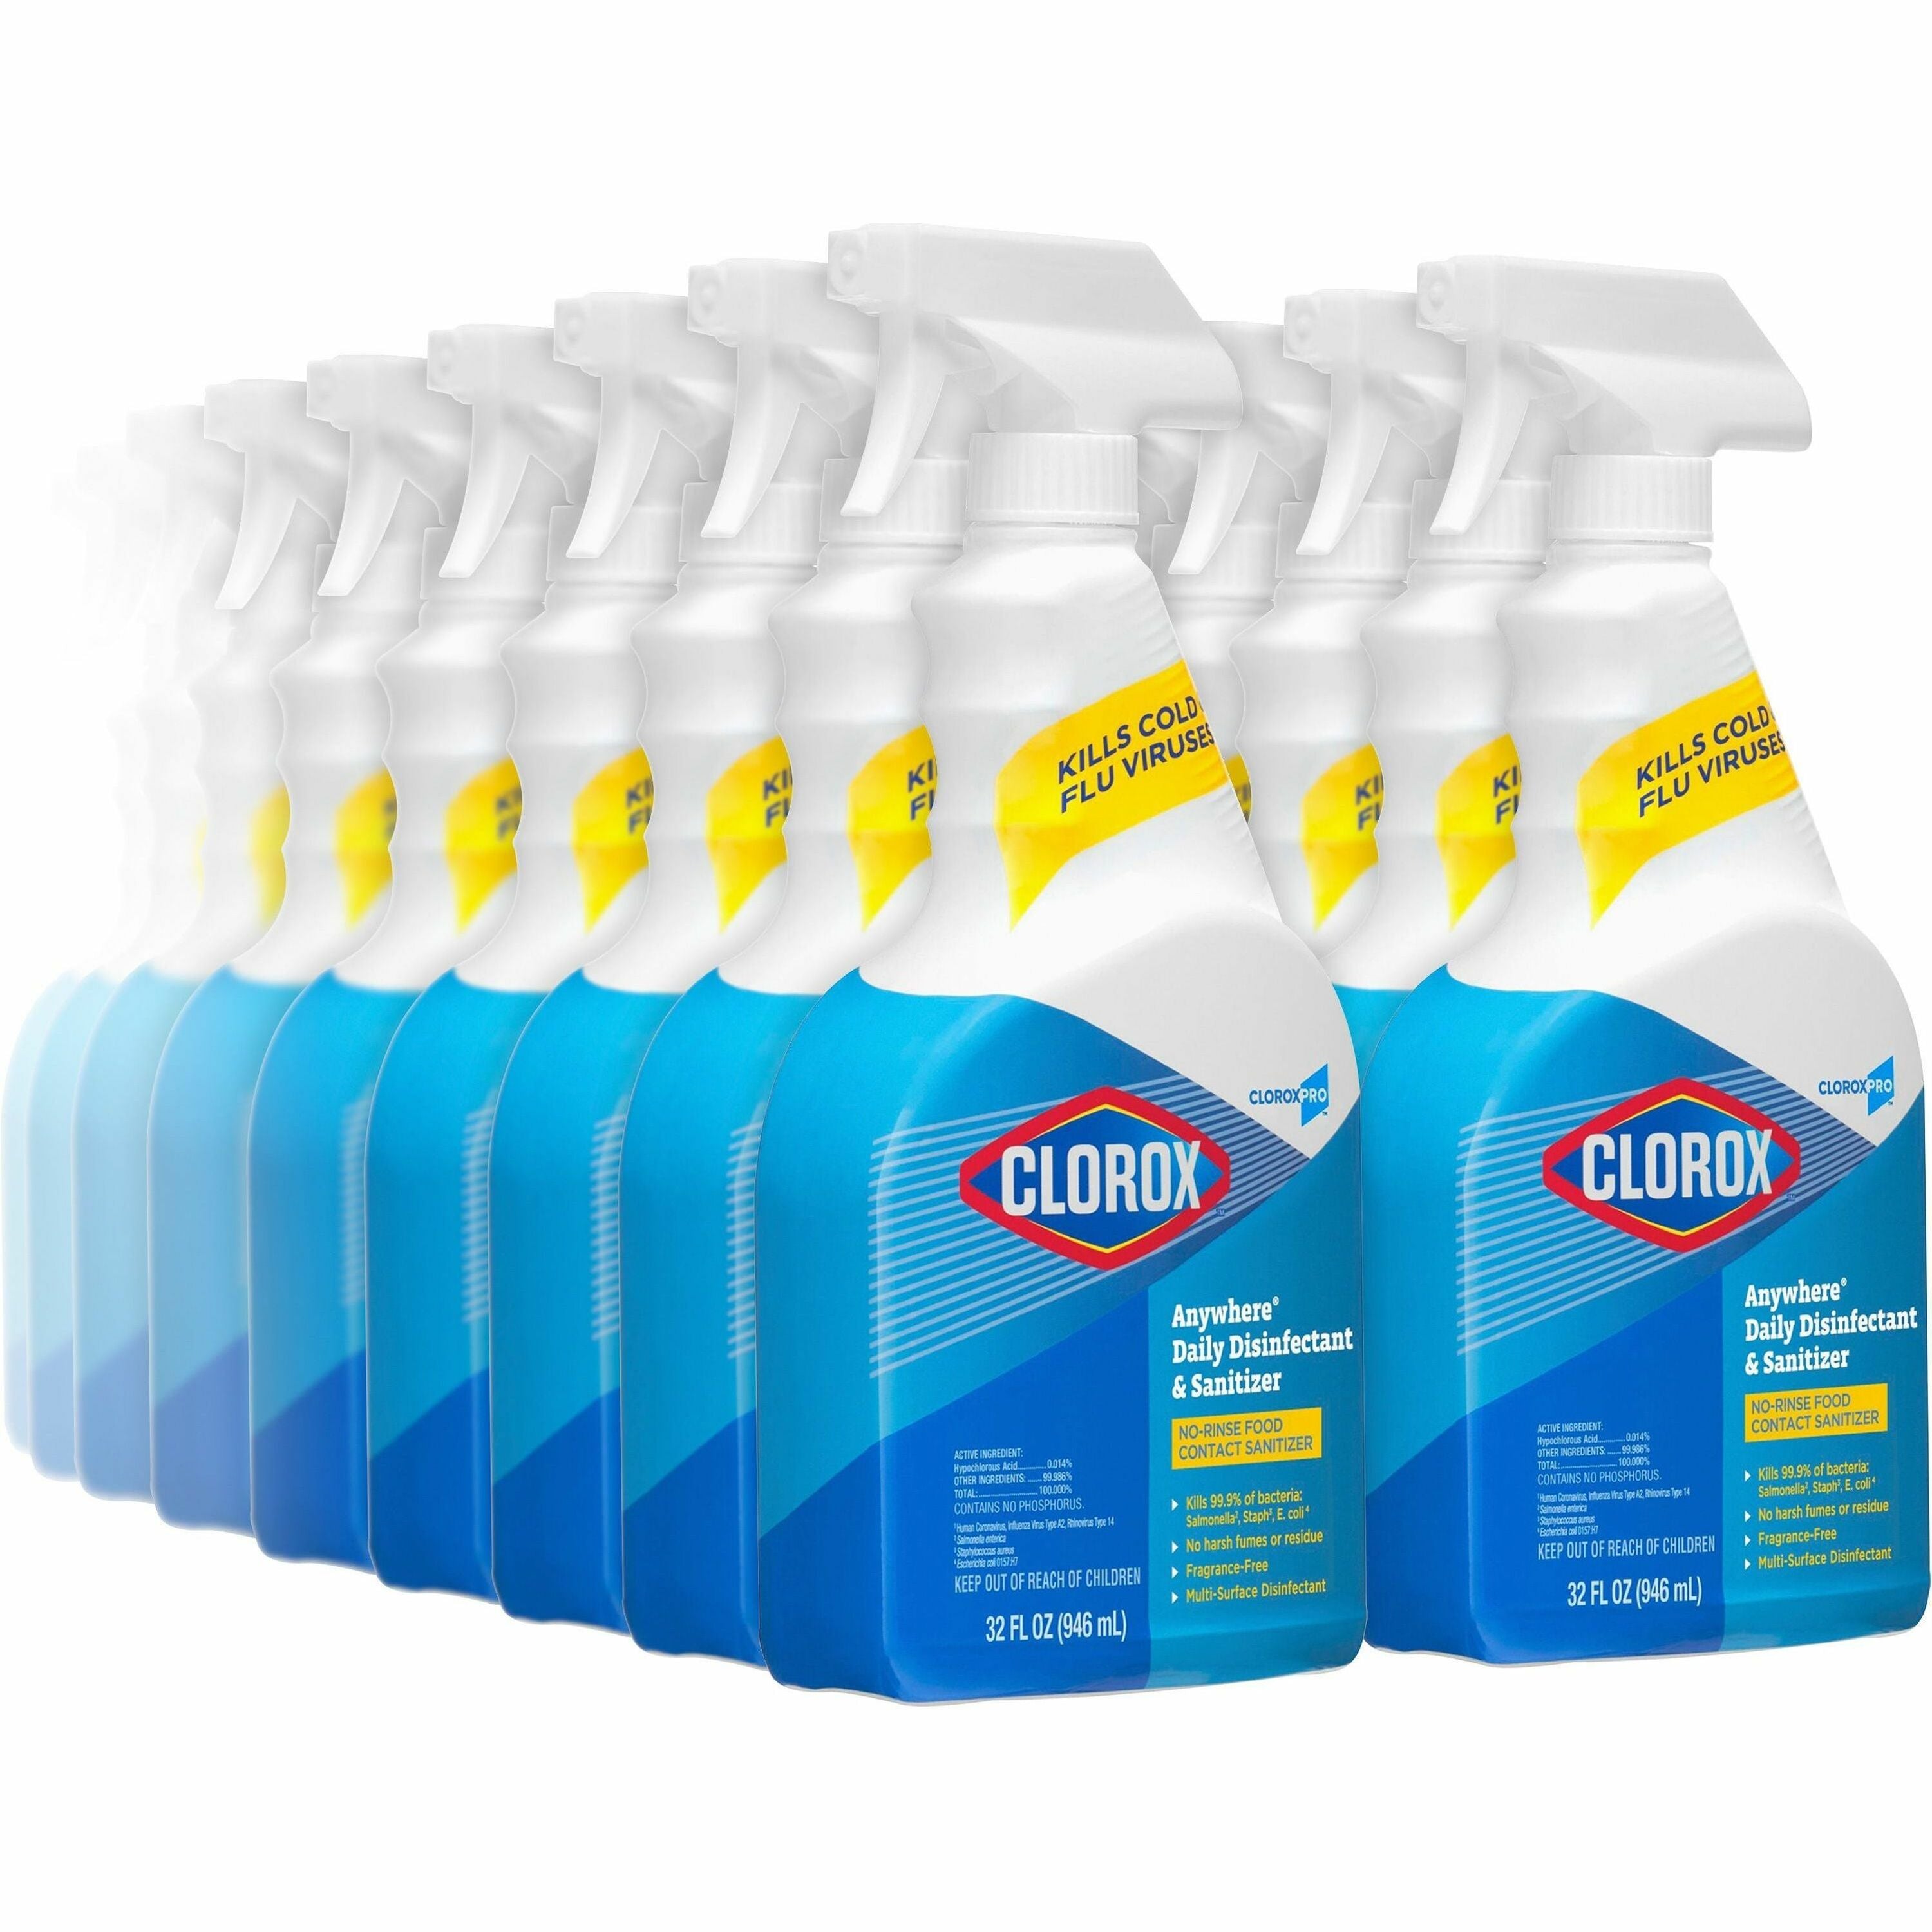 CloroxPro Anywhere Daily Disinfectant and Sanitizer - 32 fl oz (1 quart) - 432 / Pallet - Fume-free, Residue-free, Antibacterial - Clear - 1